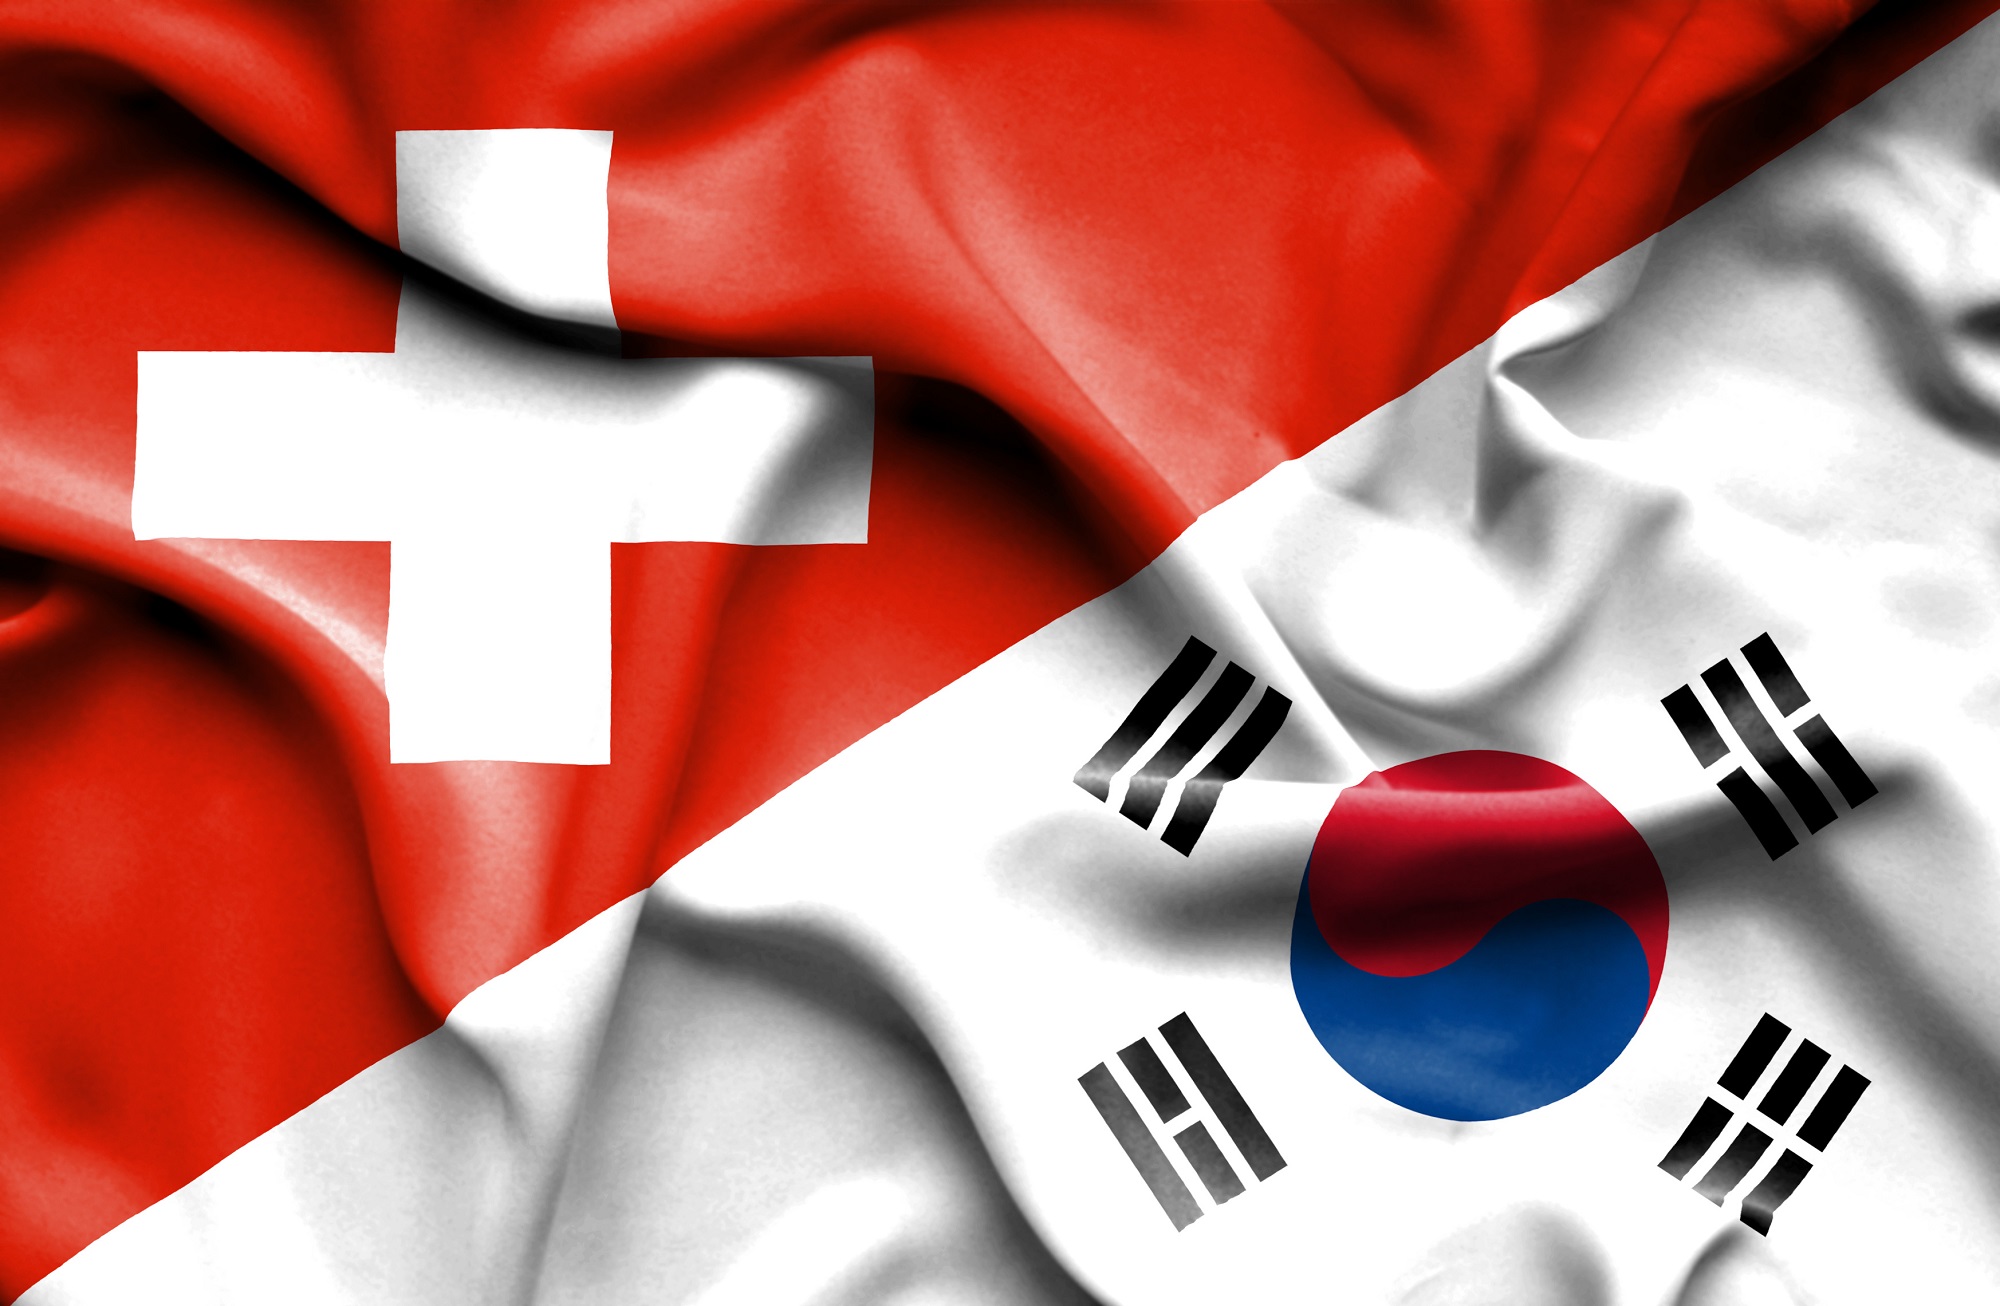 The flags of South Korea and Switzerland.